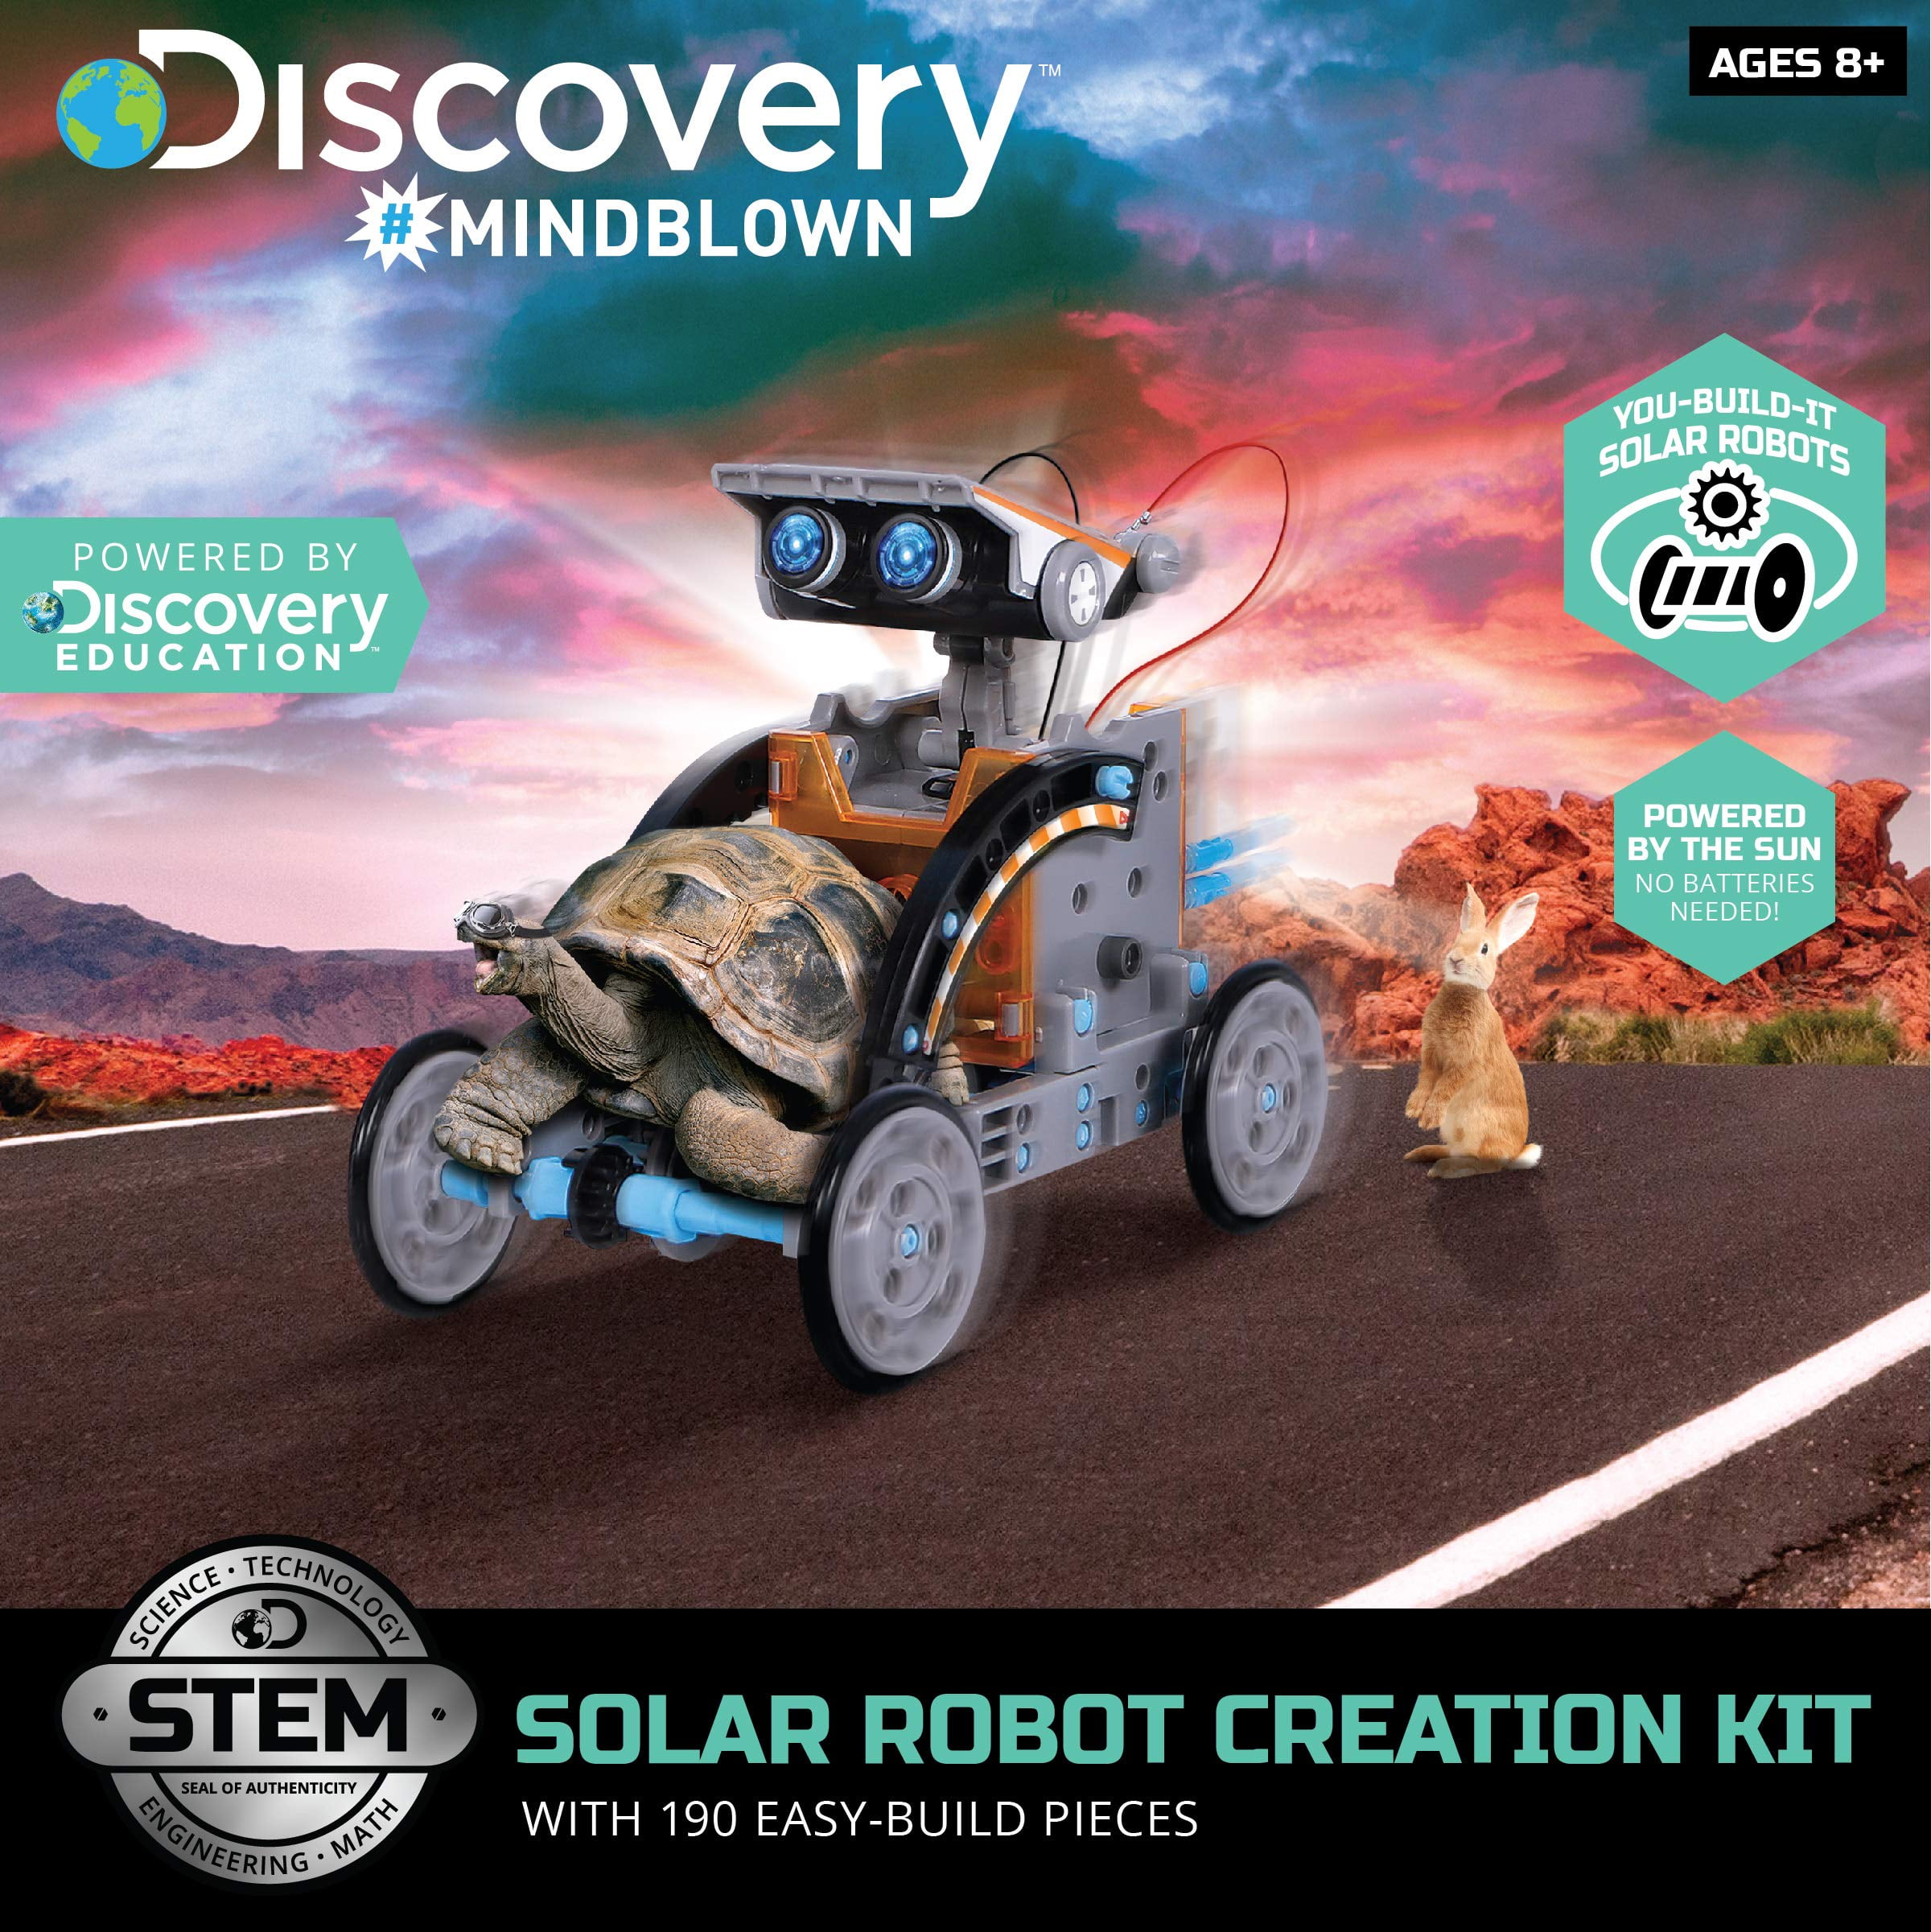 1006973 for sale online Discovery Kids Mindblown STEM 12-in-1 Solar Robot Creation 190-Piece Kit 